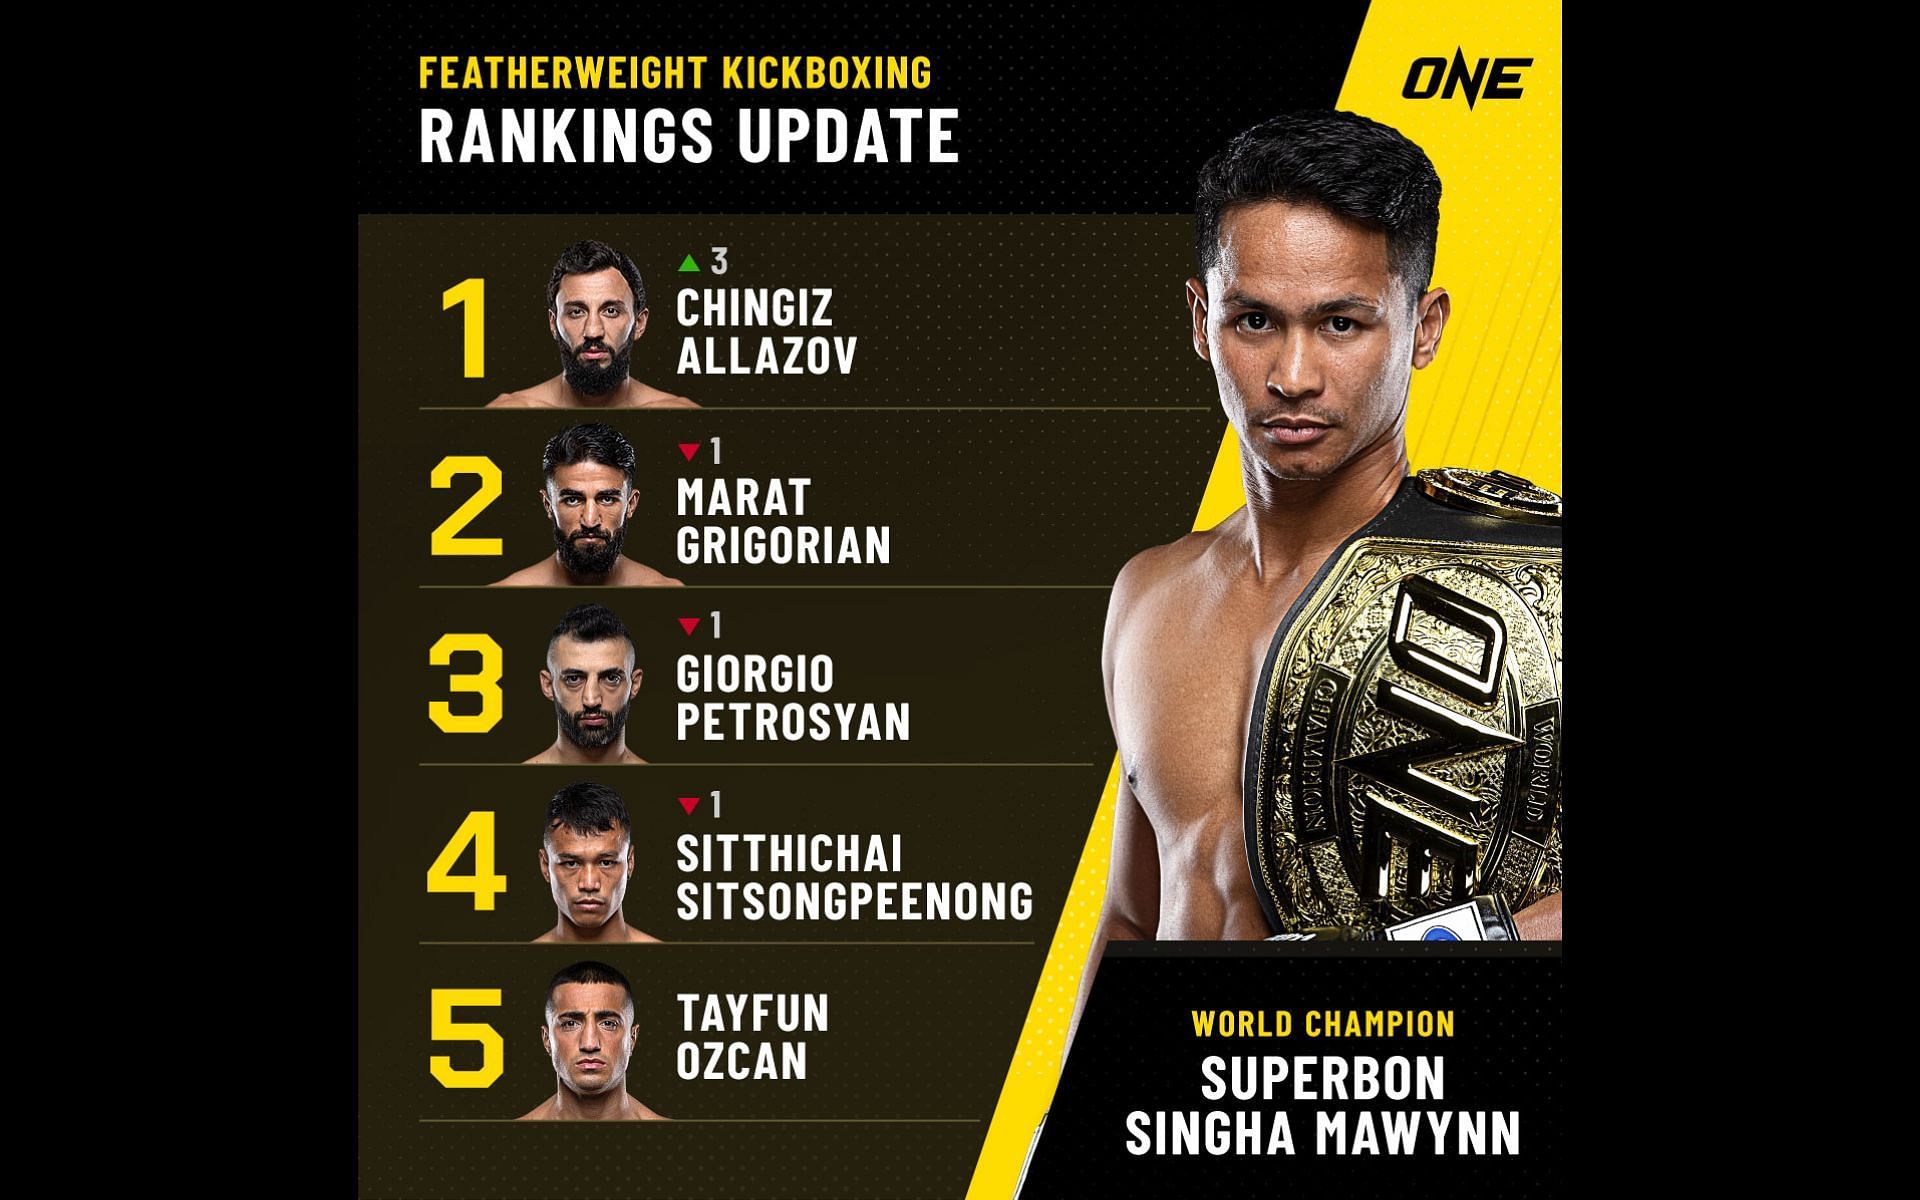 [Credit: Facebook ONE championship]